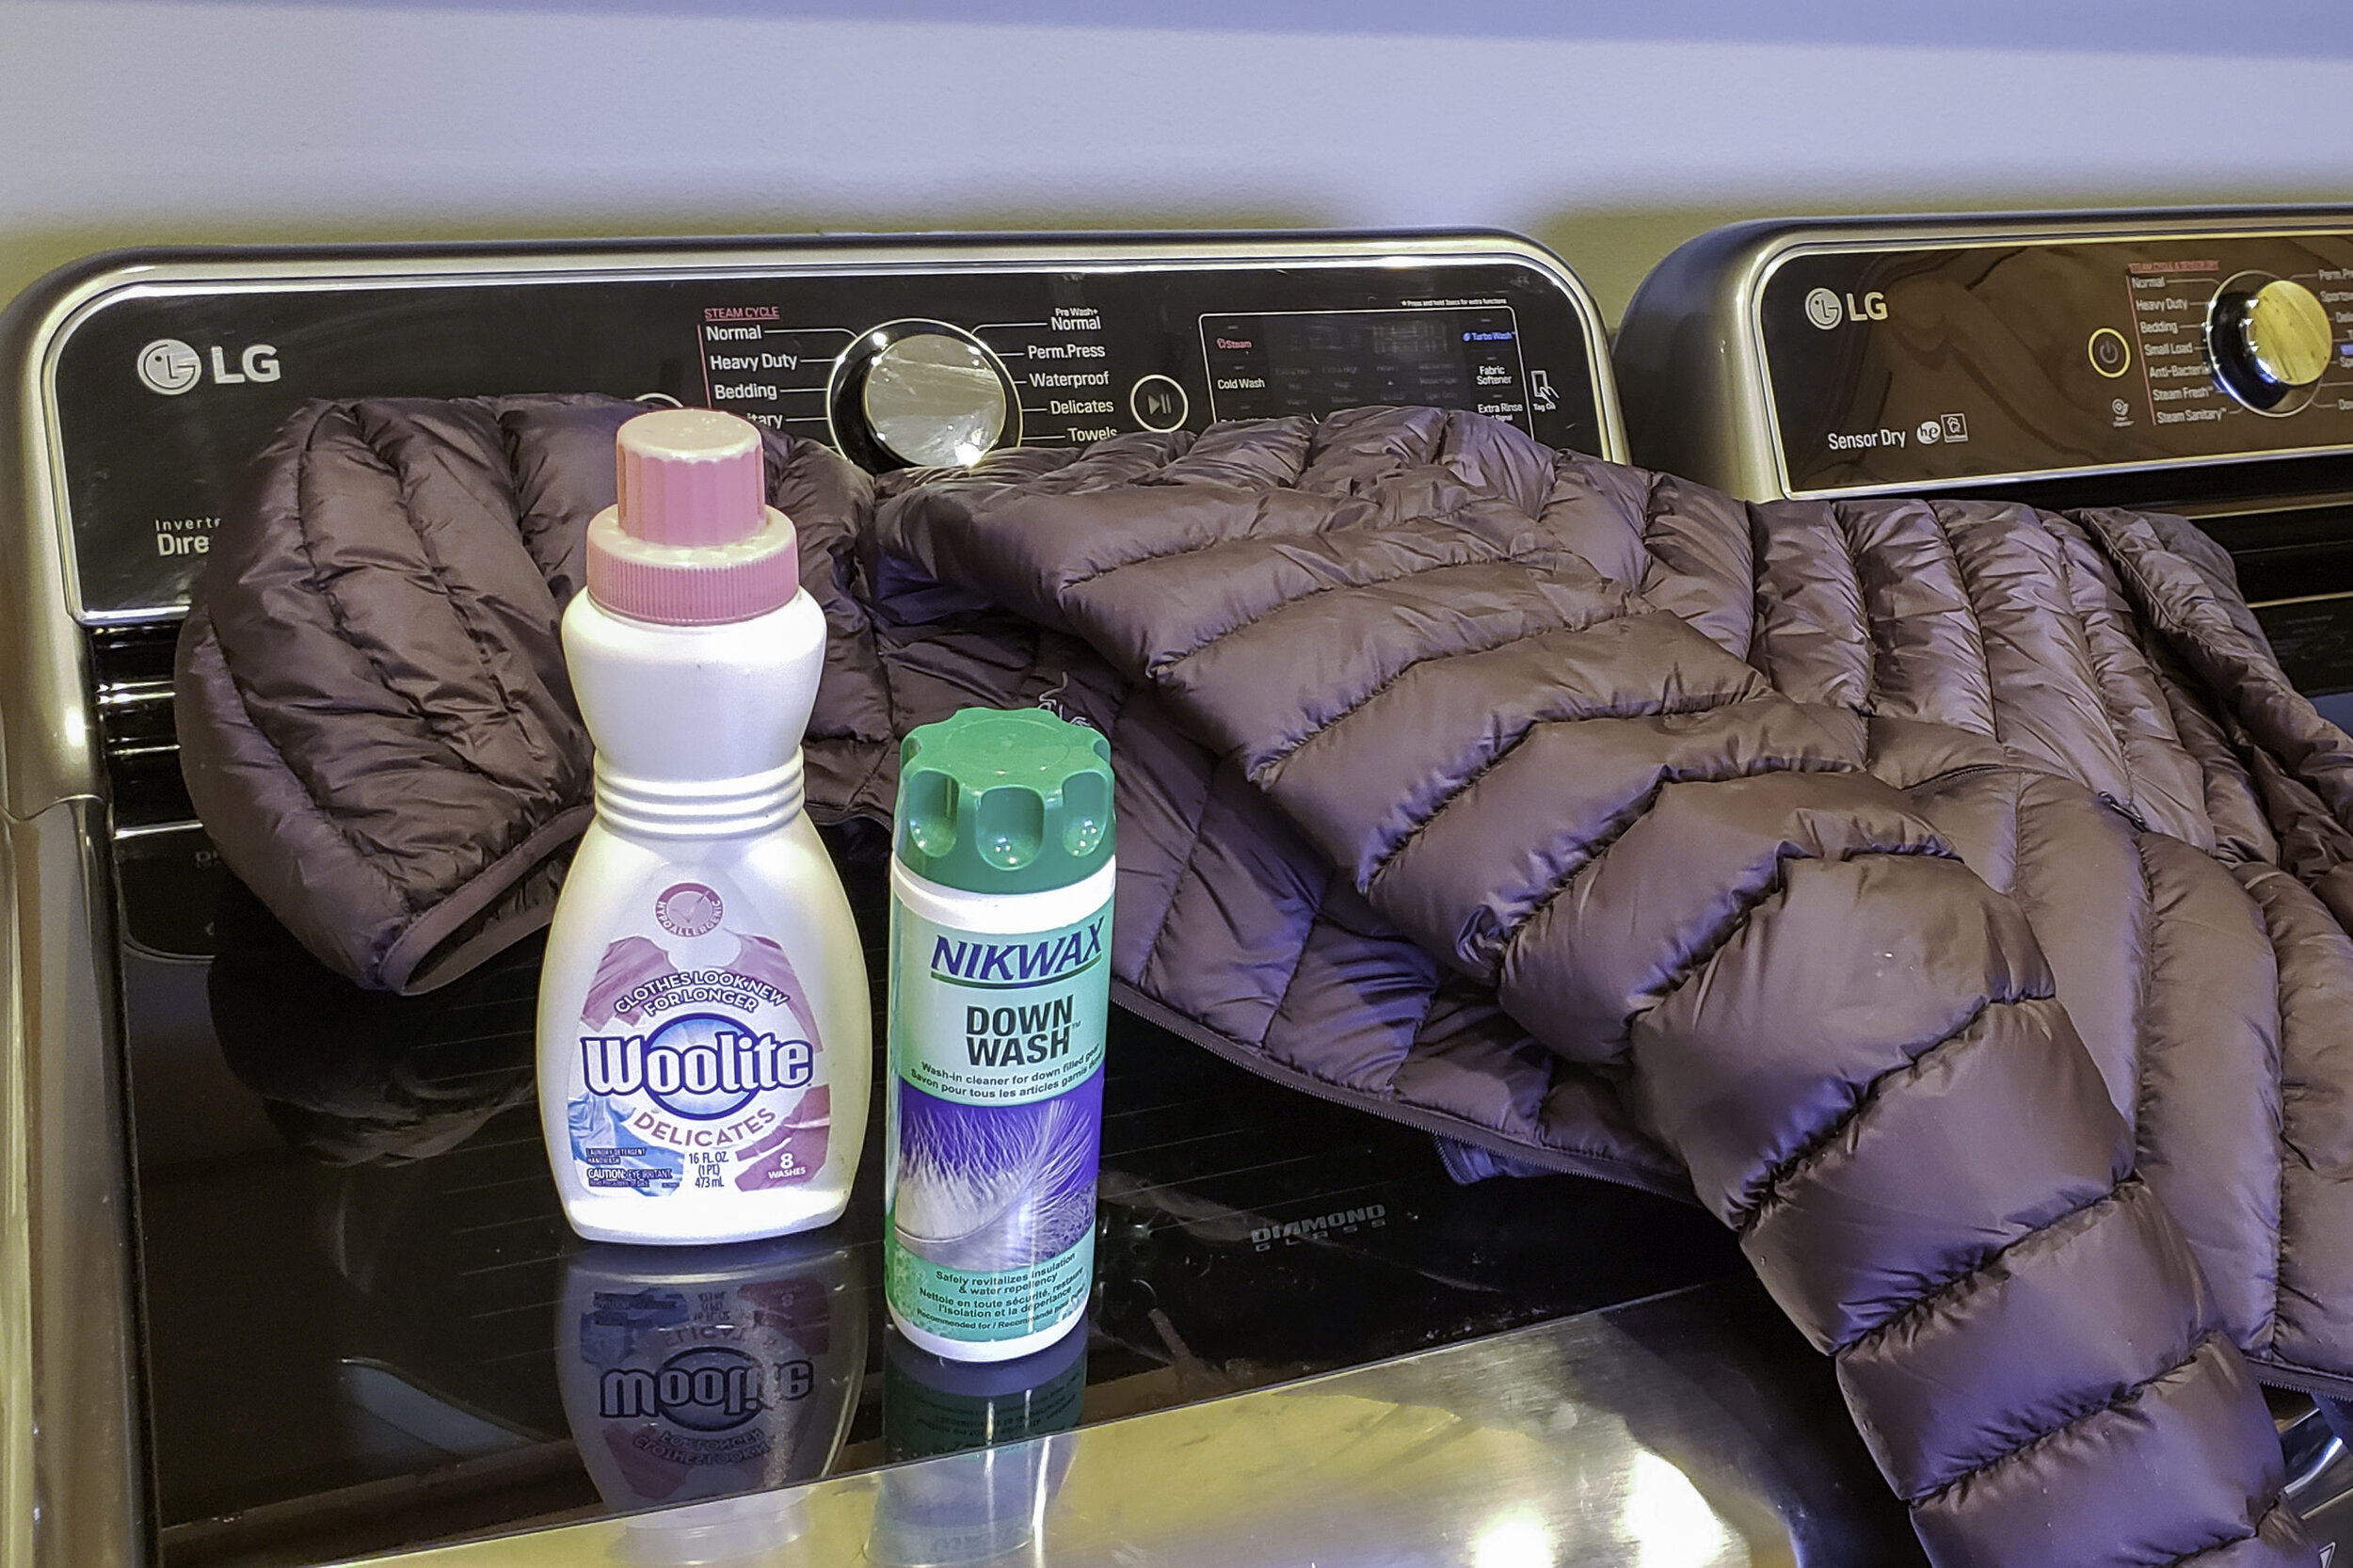 To get the most life out of your puffy jacket, wash it with Nikwax Down Direct or Woolite once or twice per year